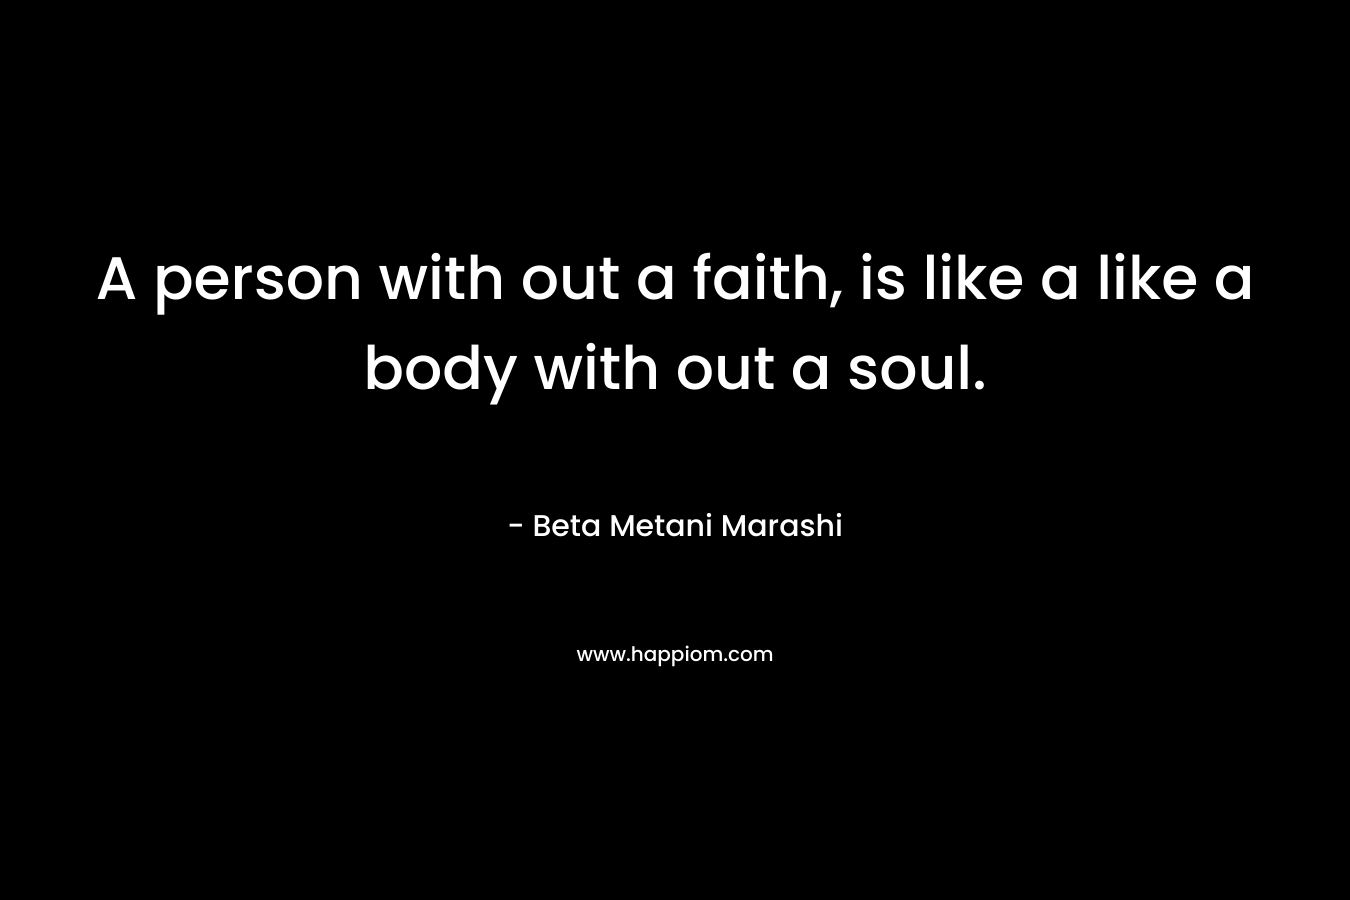 A person with out a faith, is like a like a body with out a soul.